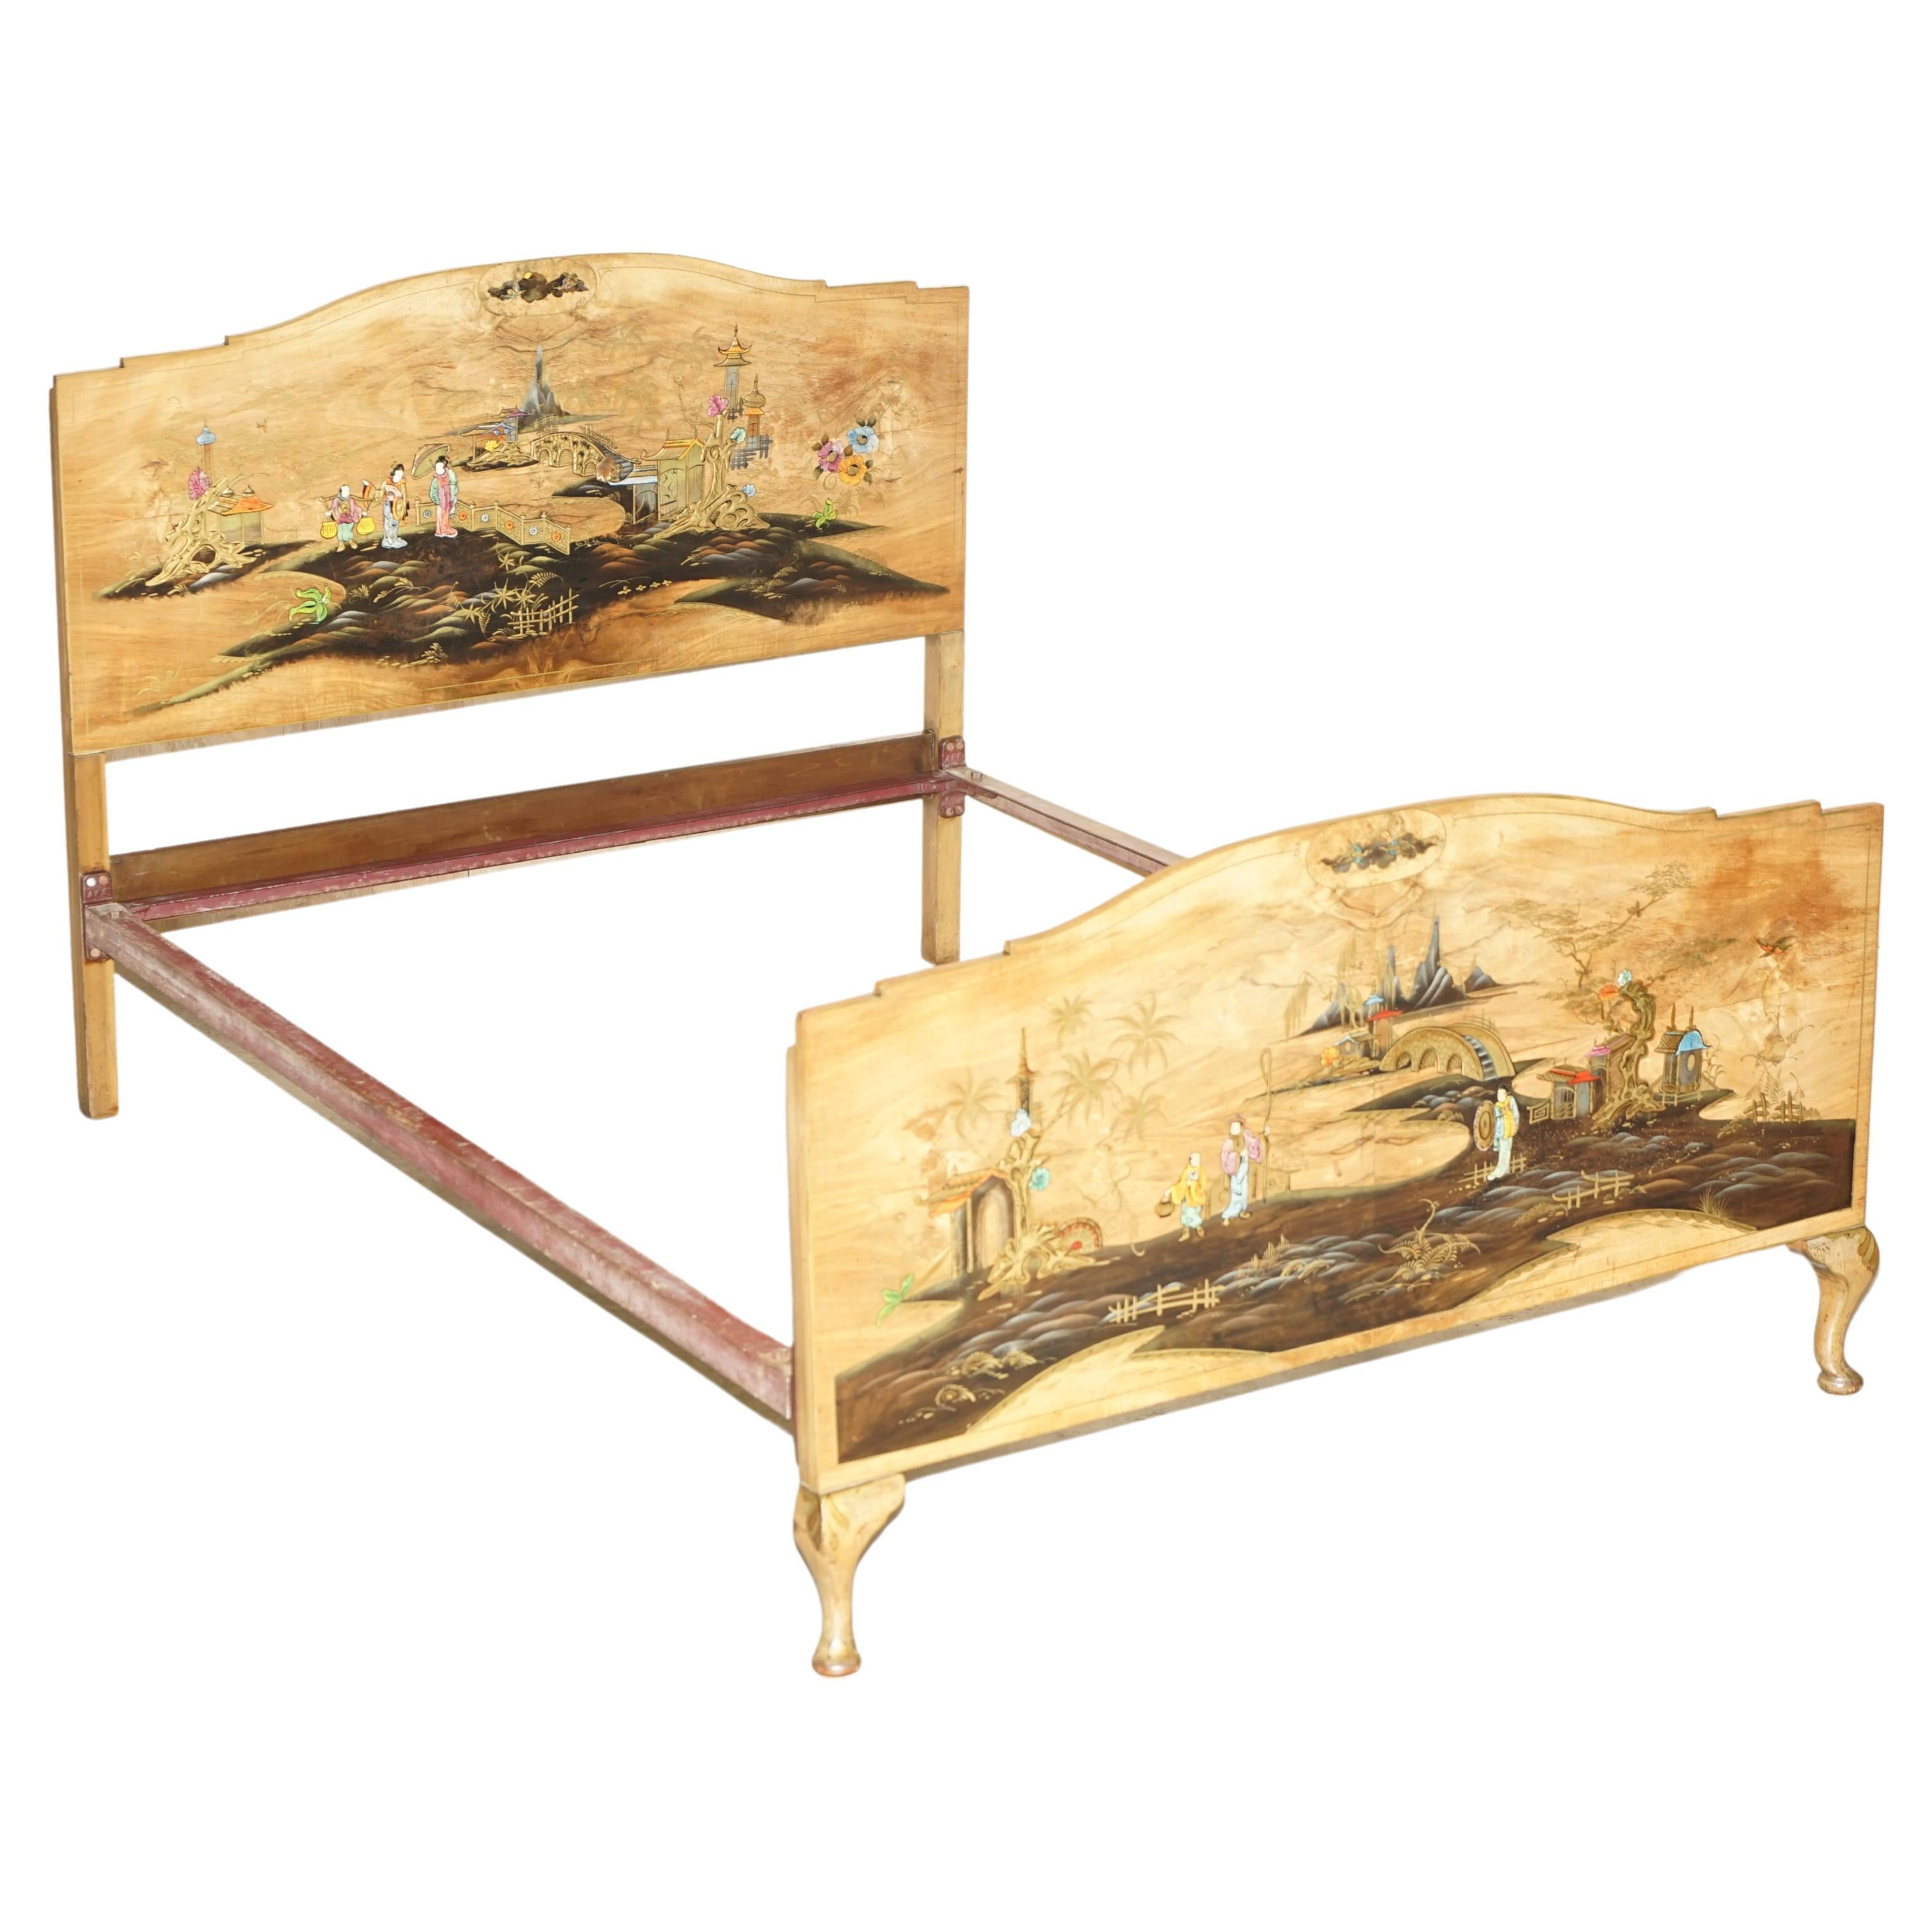 LOVELY DOUBLE SiZED CIRCA 1920 CHINESE CHINOISERIE BEDSTEAD FRAME PART SUITE im Angebot